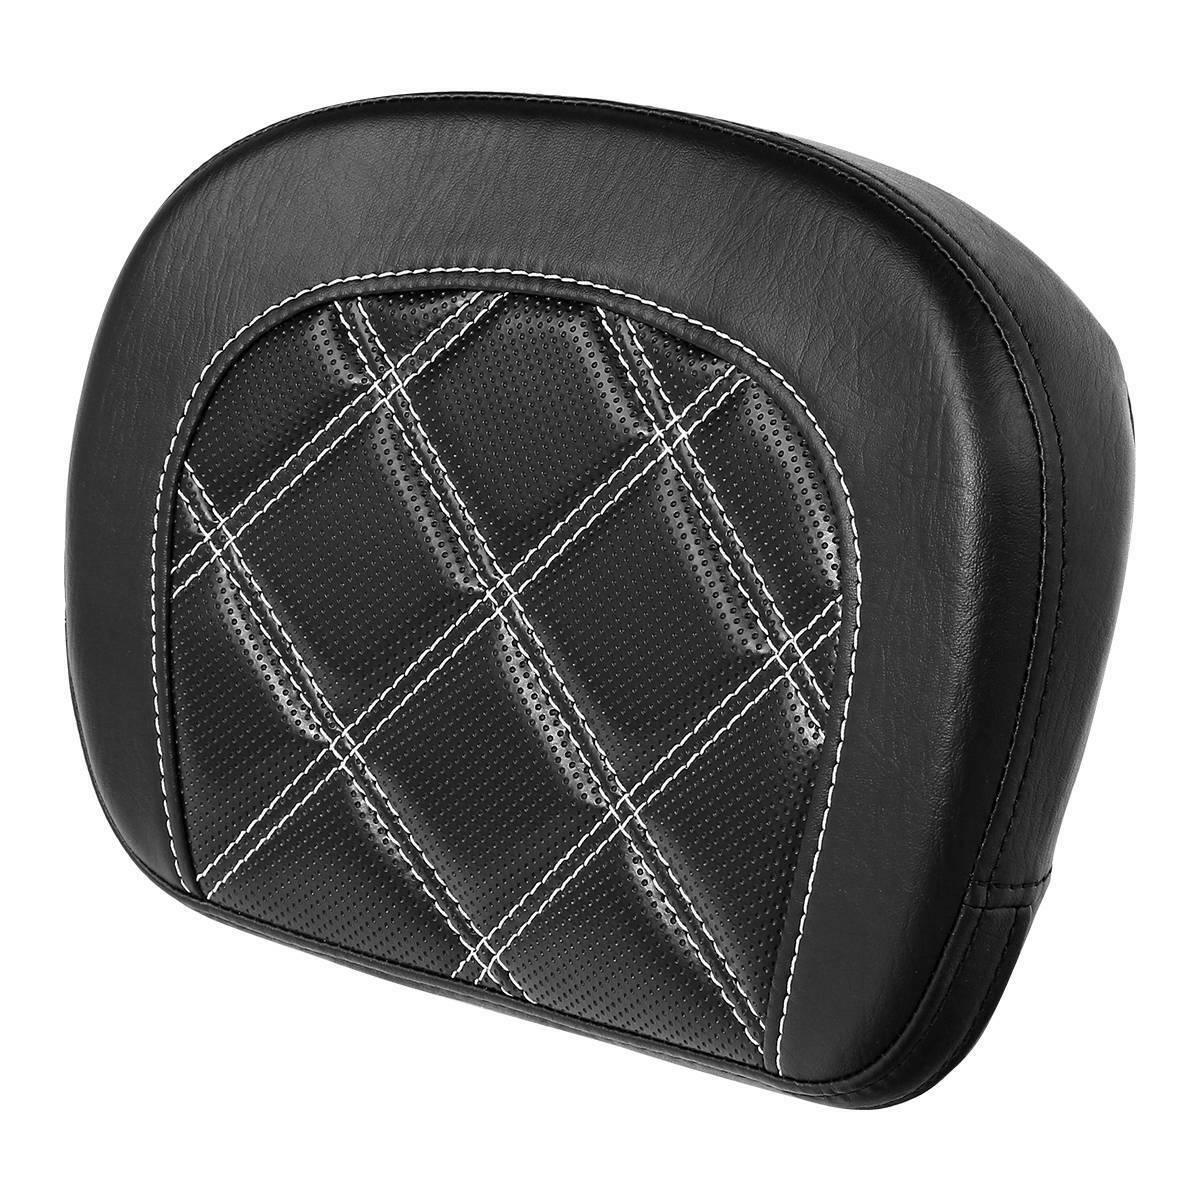 Passenger Sissy Bar Backrest Pad Fit For Harley Touring CVO Street Glide FLHXSE - Moto Life Products